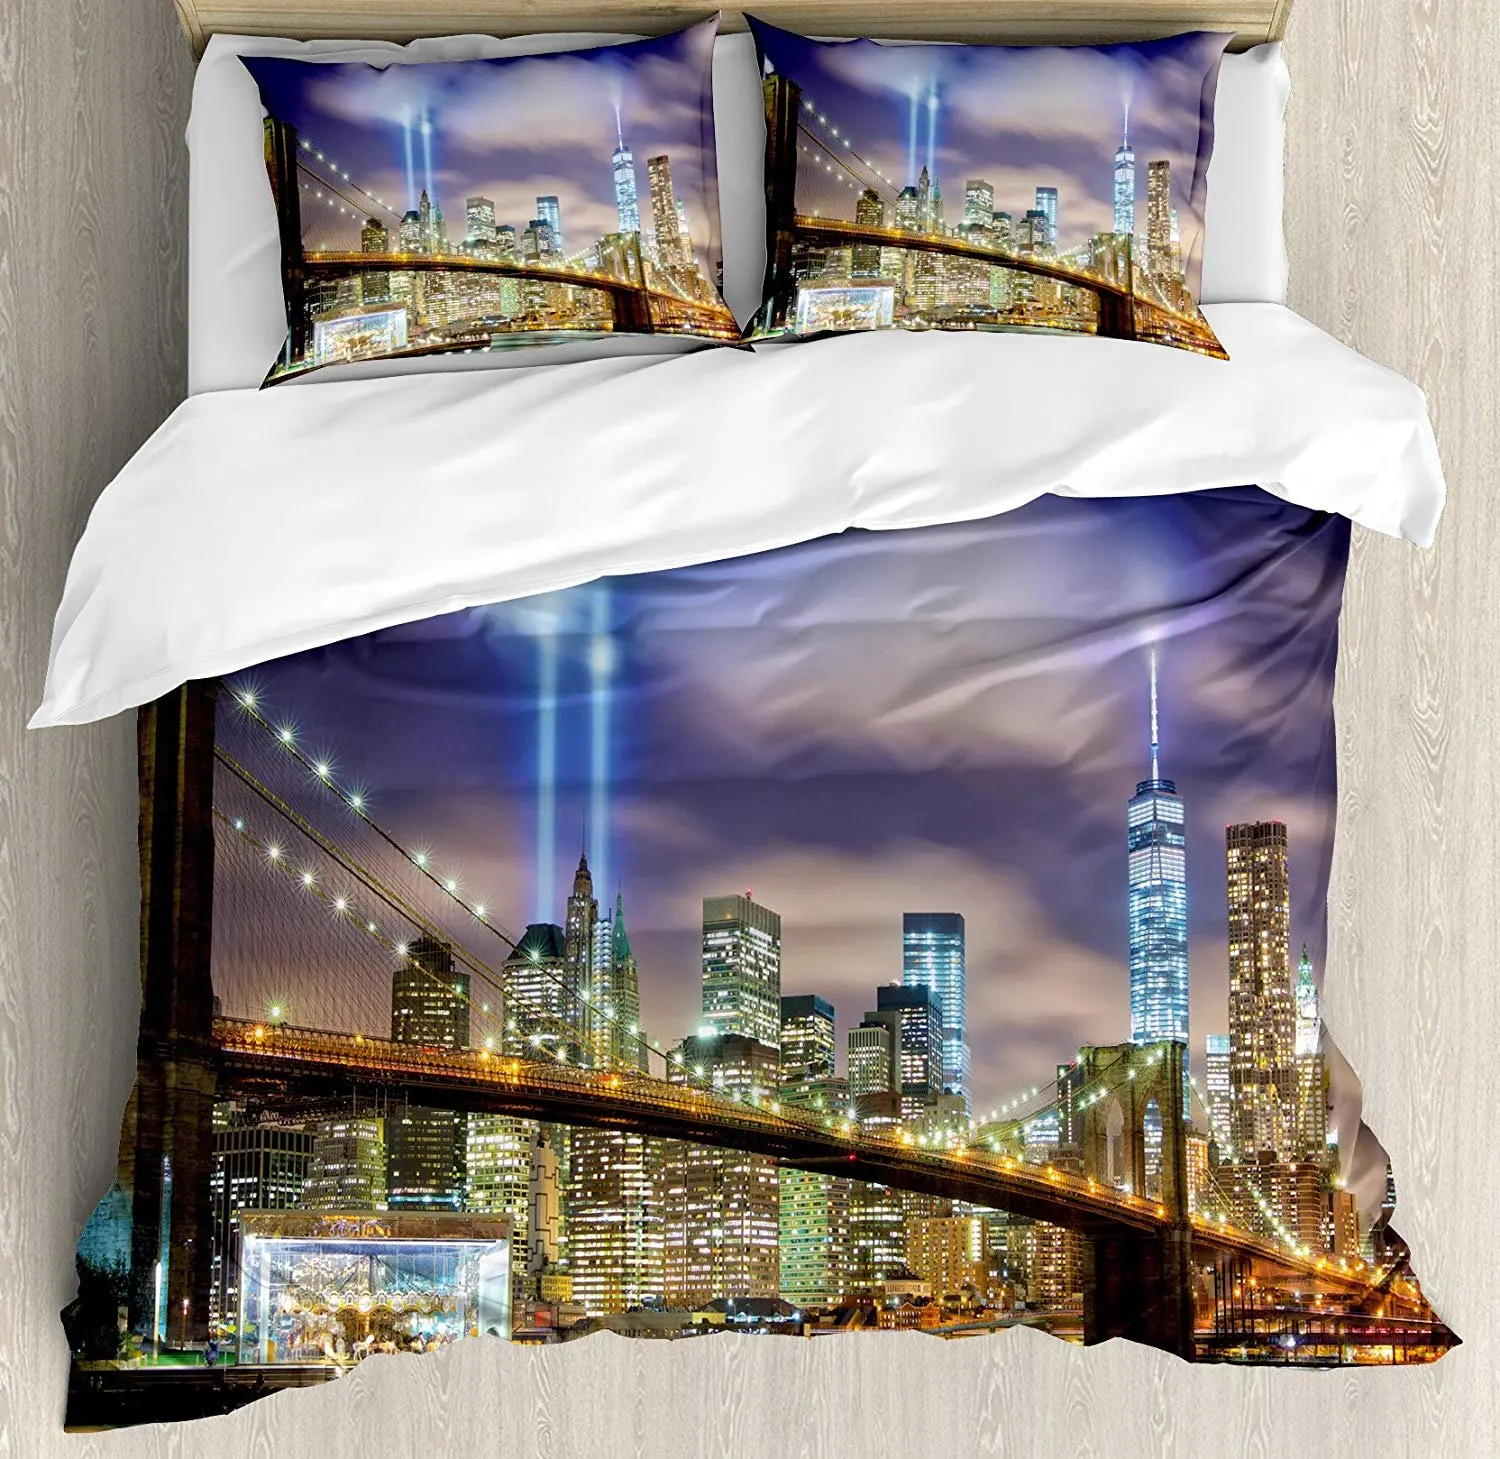 

Landscape Bedding Set Manhattan Skyline with Brooklyn Bridge and Towers in NYC United States America Duvet Cover Pillowcase